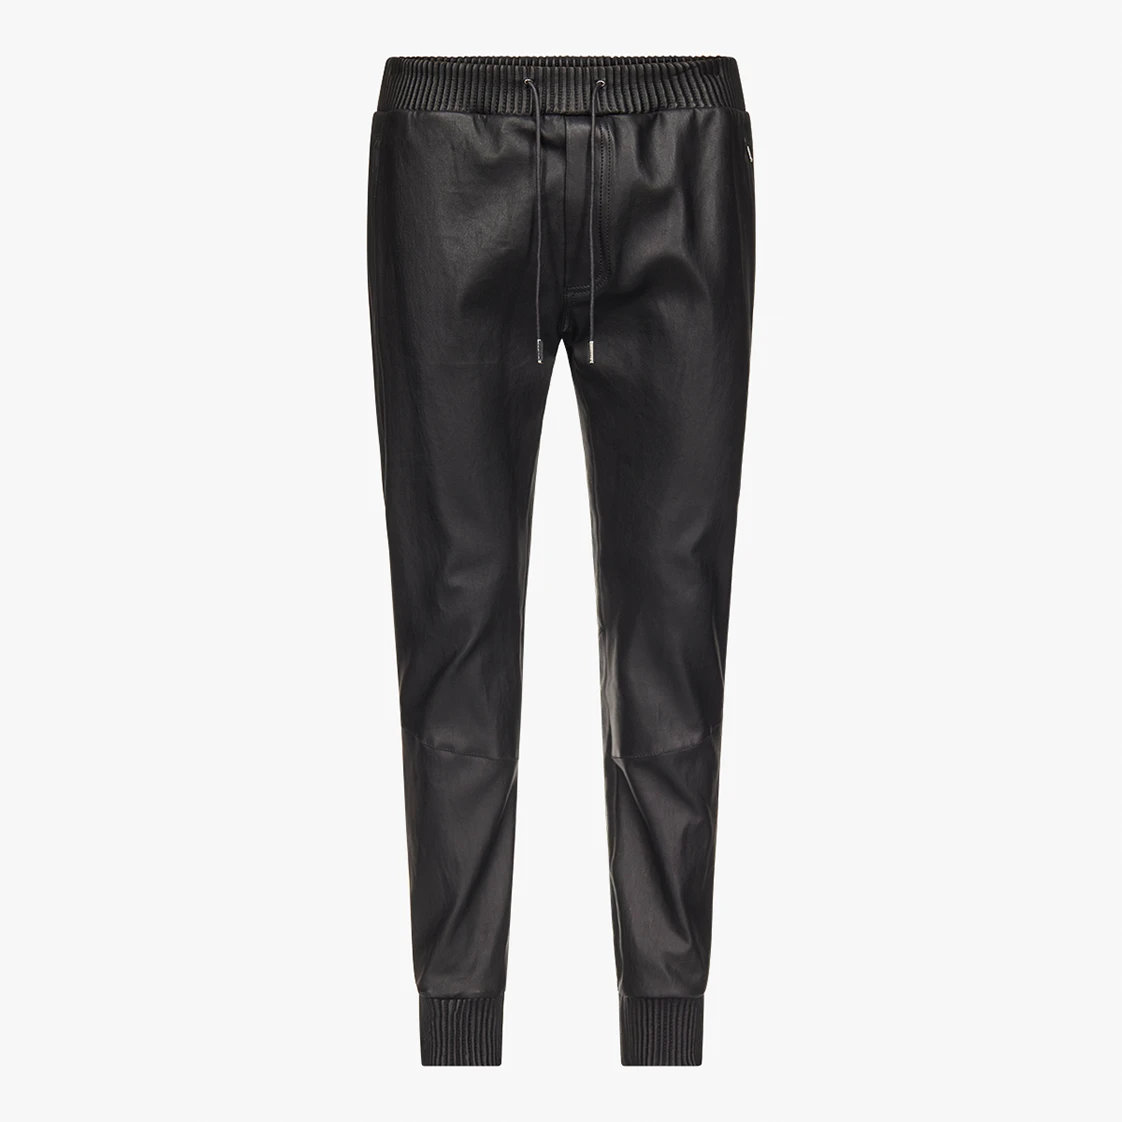 Topman Trousers & Lowers for Men sale - discounted price | FASHIOLA INDIA